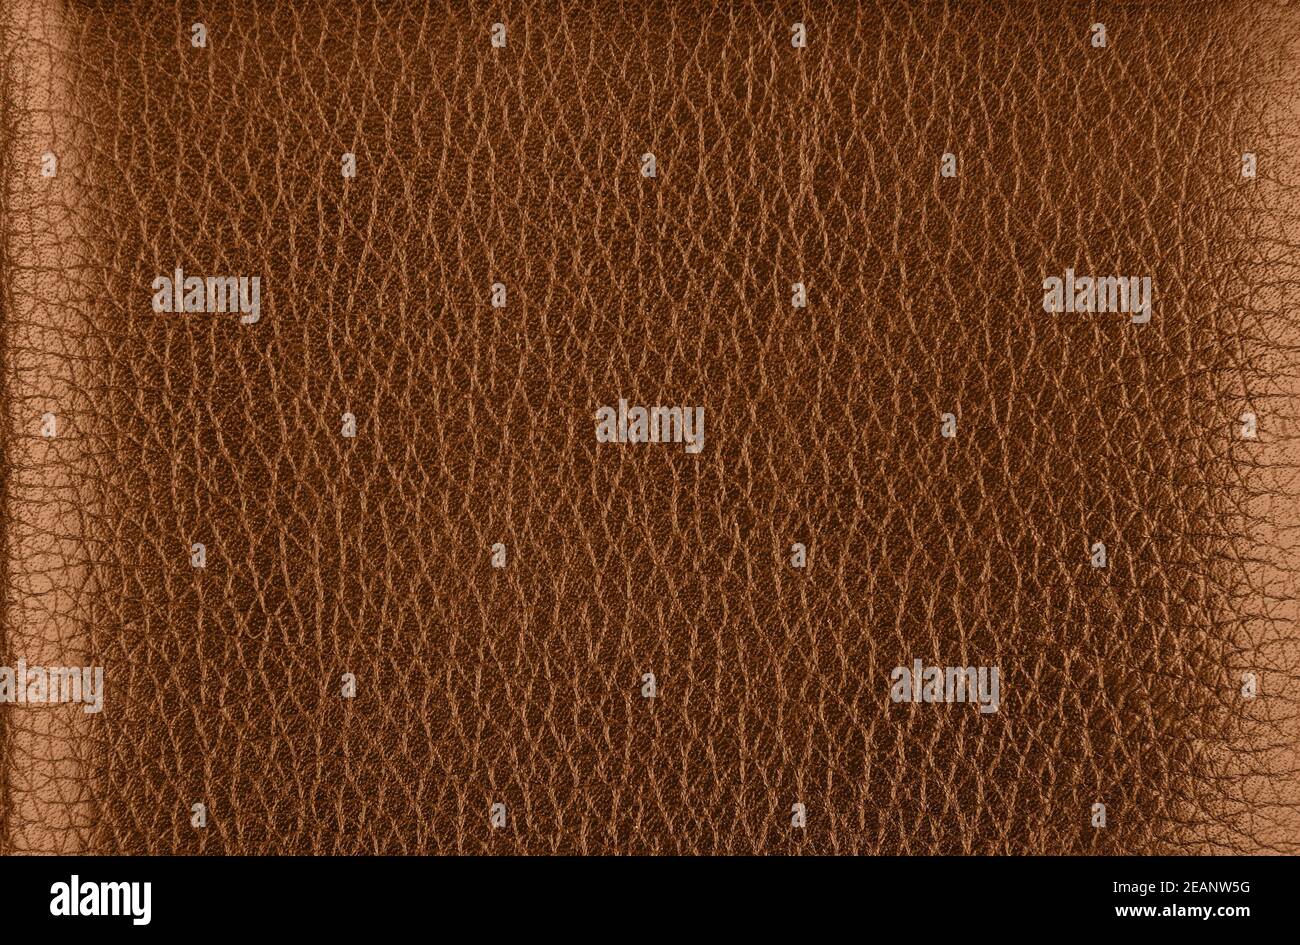 Brown Natural or Genuine Leather Texture for Background. Saffiano Leather  Stock Photo - Image of design, backdrop: 196748930